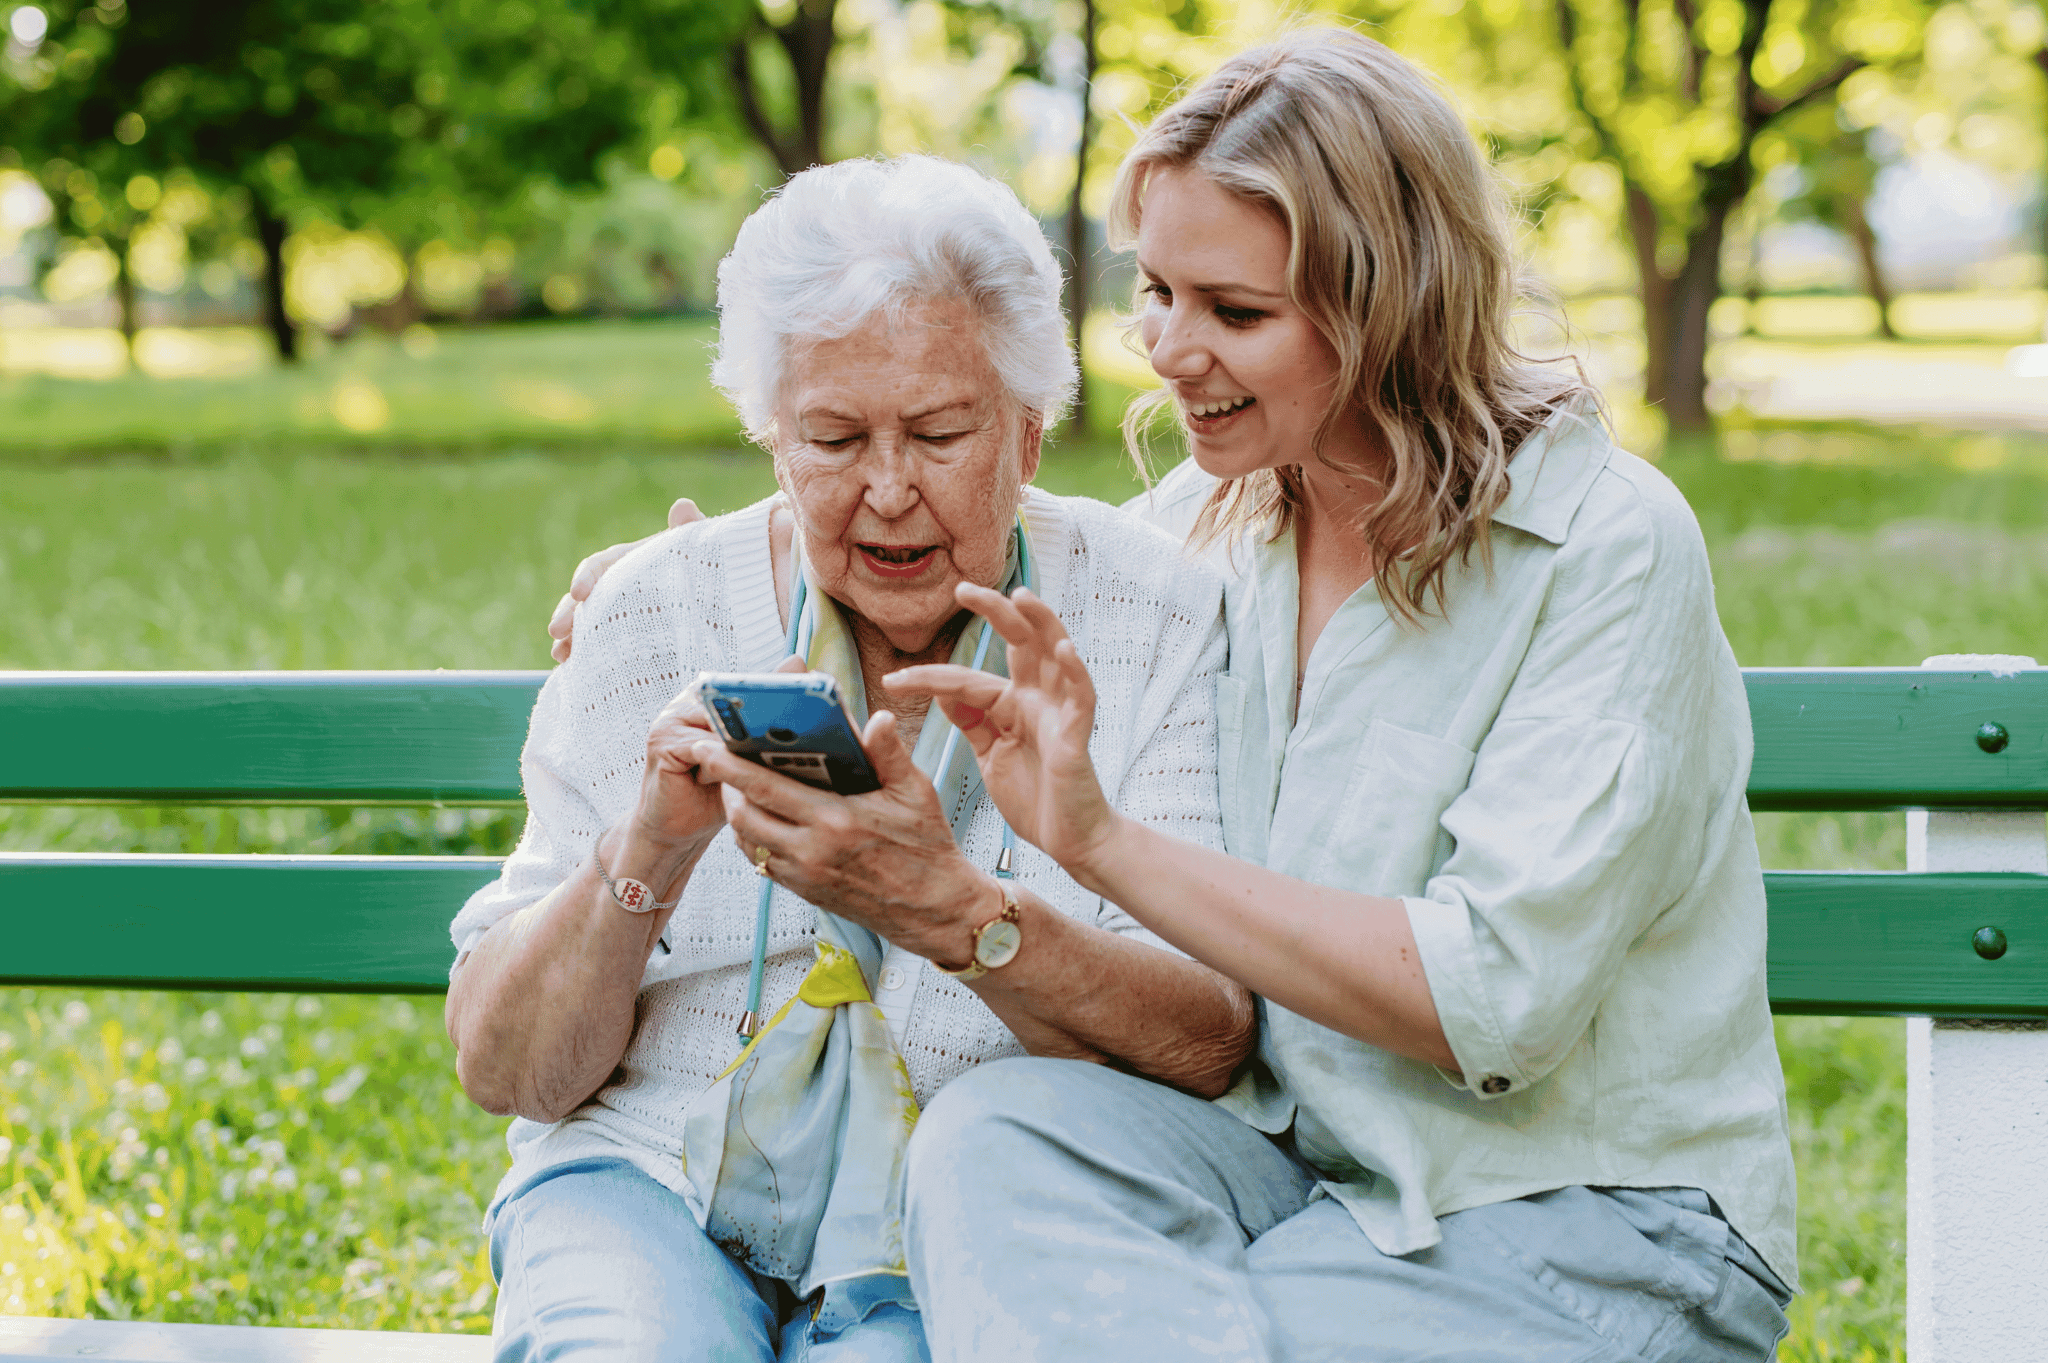 Grandmother wearing a medical ID bracelet sitting in the park with her granddaughter